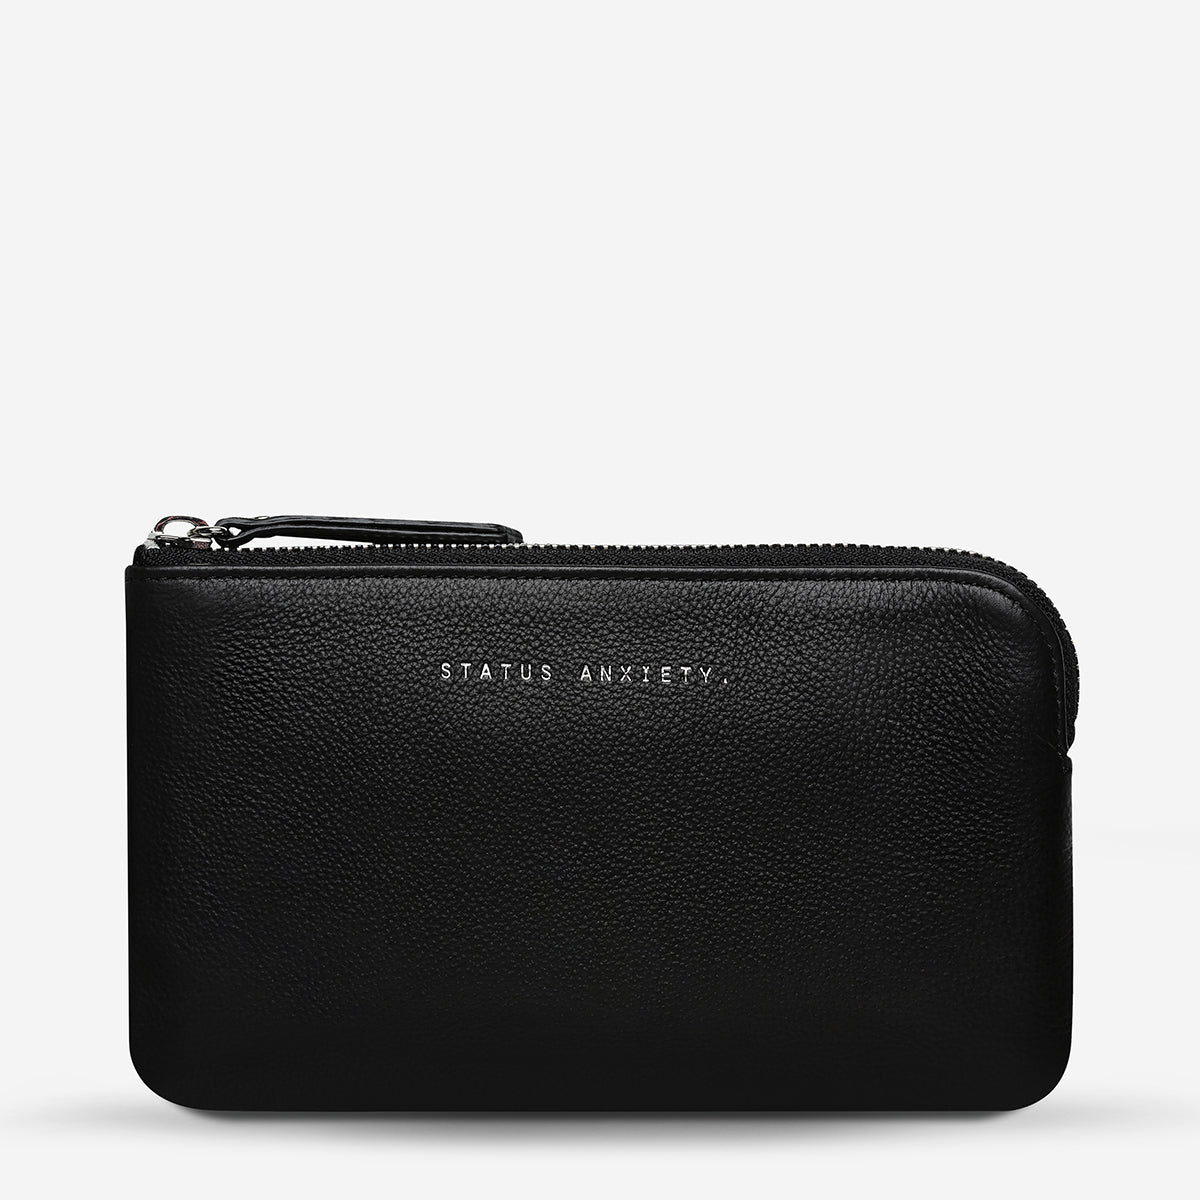 Status Anxiety Smoke and Mirrors Women's Leather Pouch Wallet Black